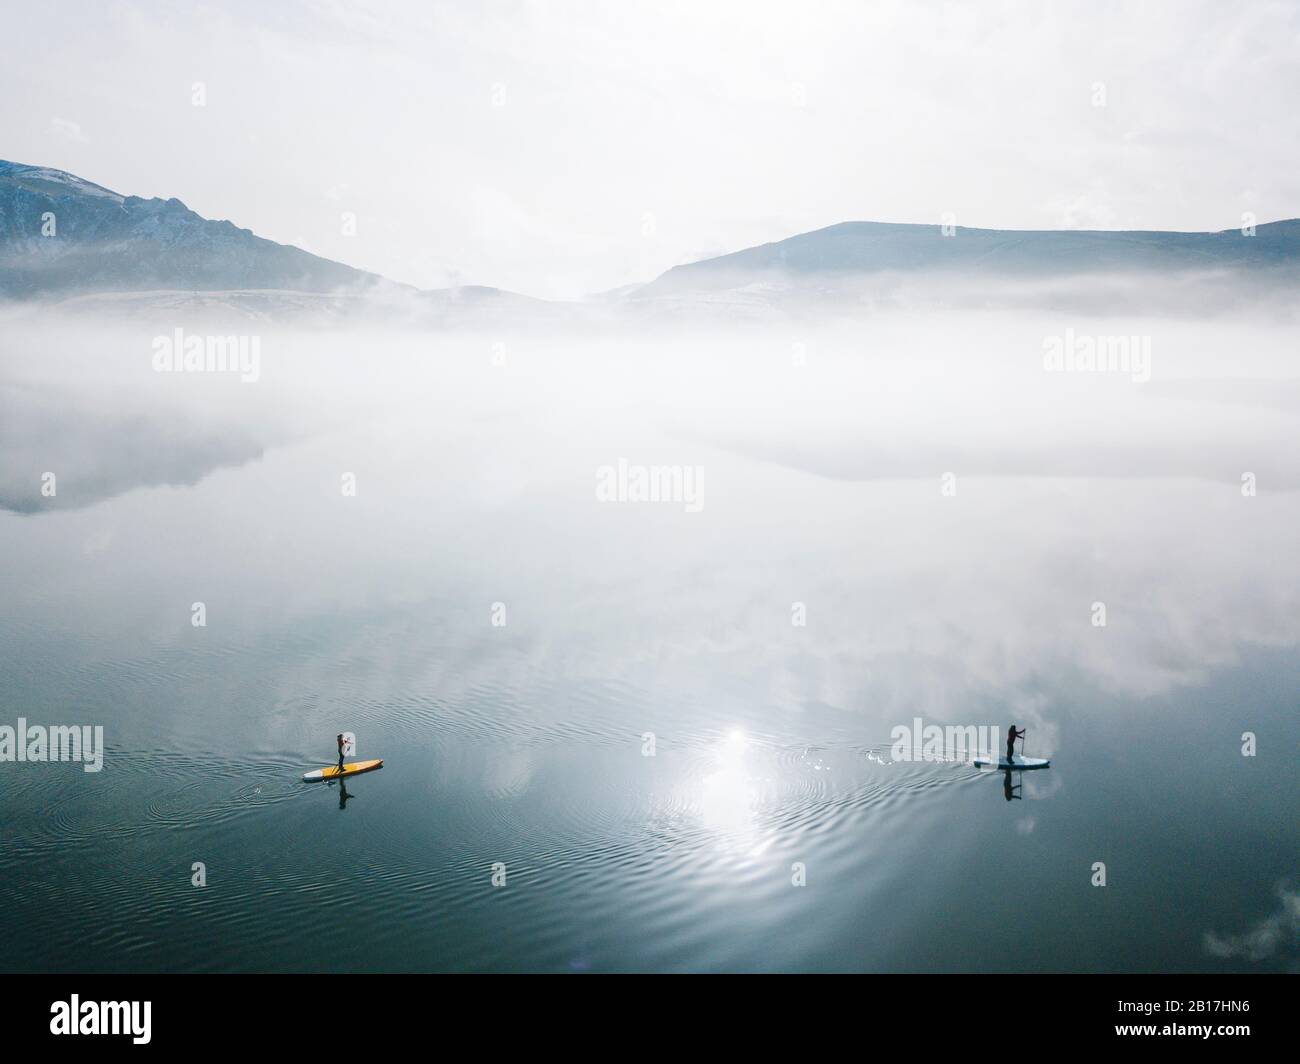 Aerial view of two people stand up paddle surfing, Leon, Spain Stock Photo